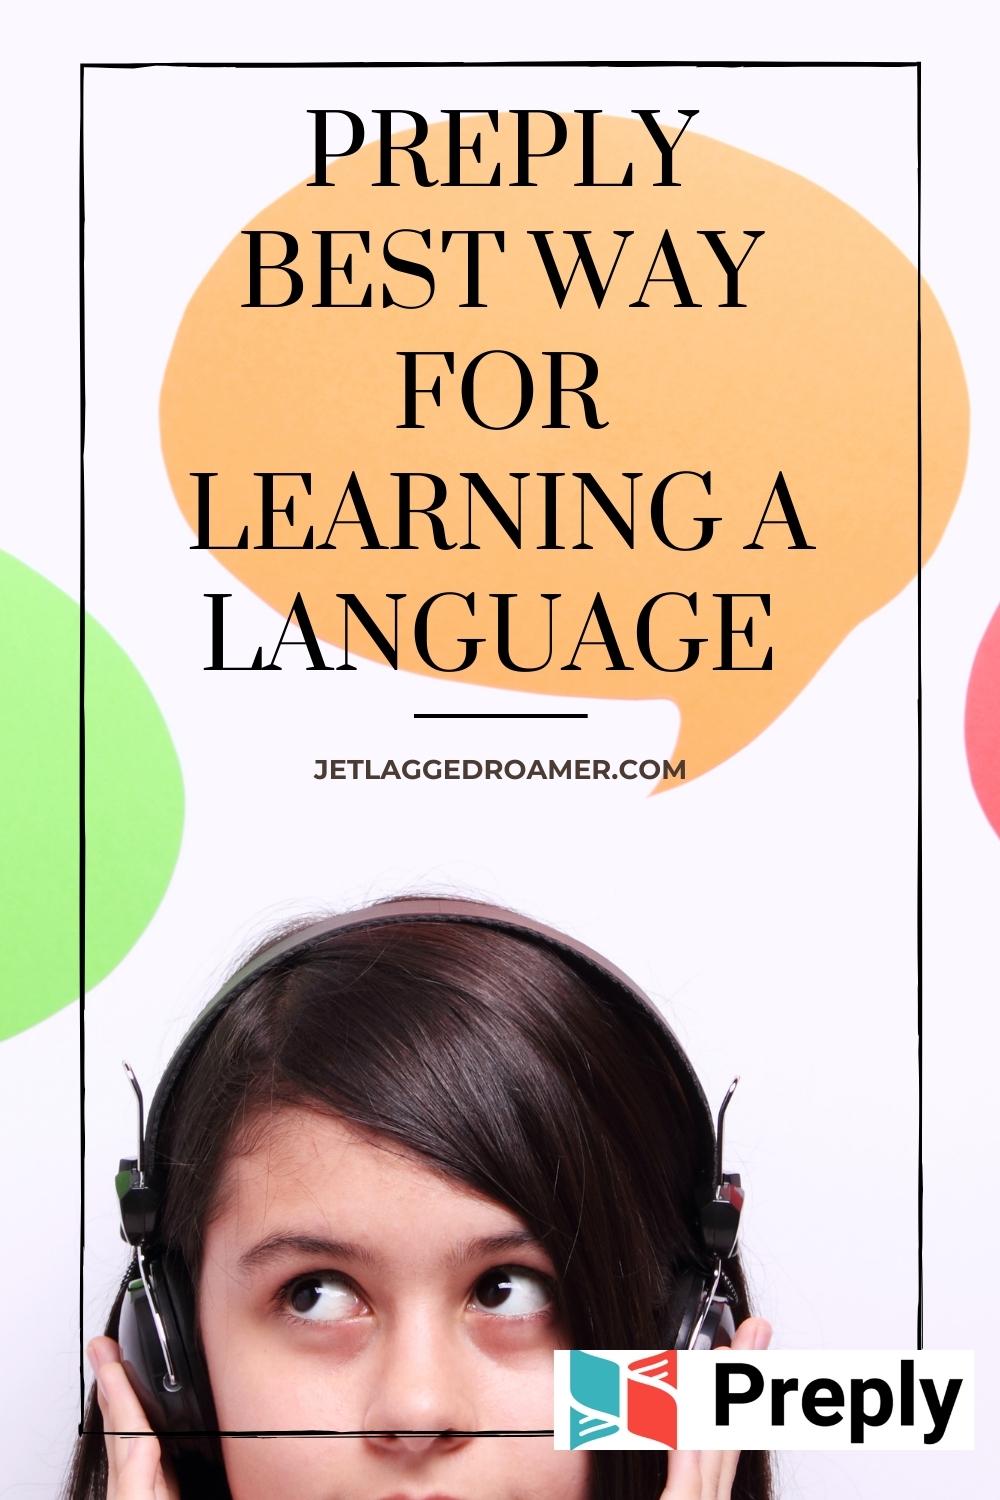 Pinterest pin of woman with headphones. Text says Preply best way for learning a language.